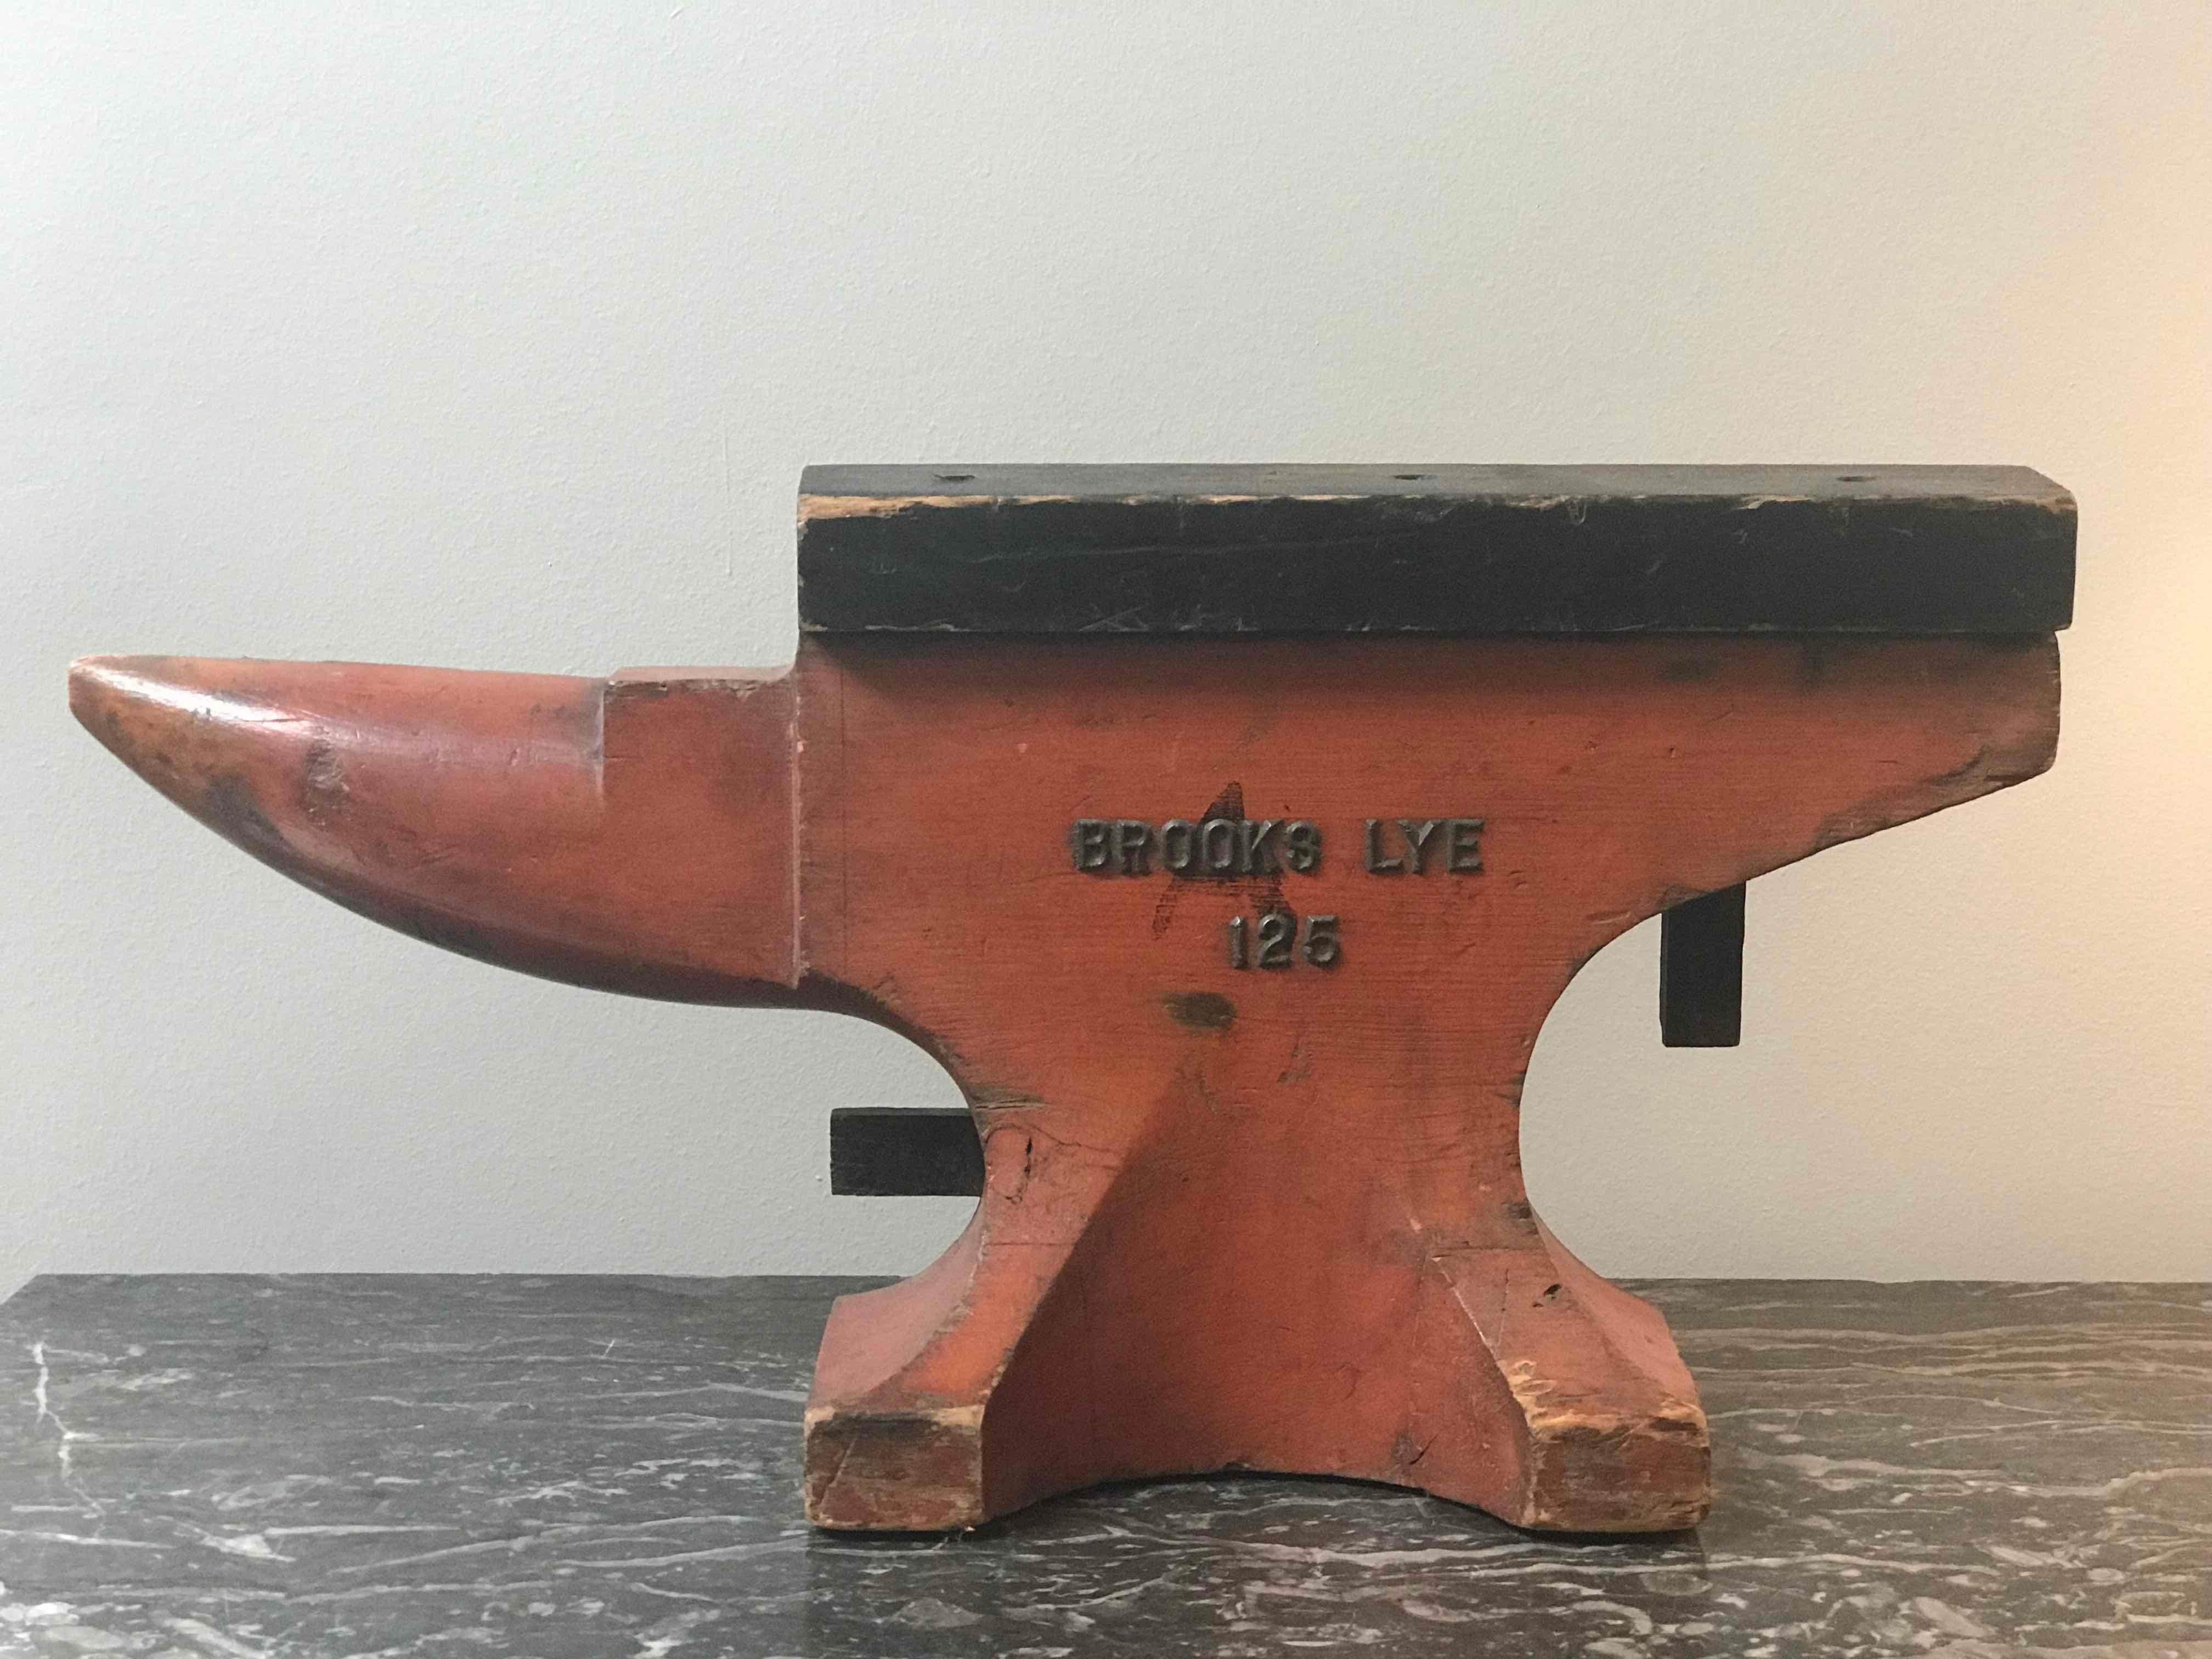 Pair of Brooks Lye red painted wooden anvil models from 1940s England. Now produced under the name Vaughn, John Brooks Lye LTD Blacksmiths was known for producing high quality cast steel anvils during WWII. With their sculptural shape vibrant color,